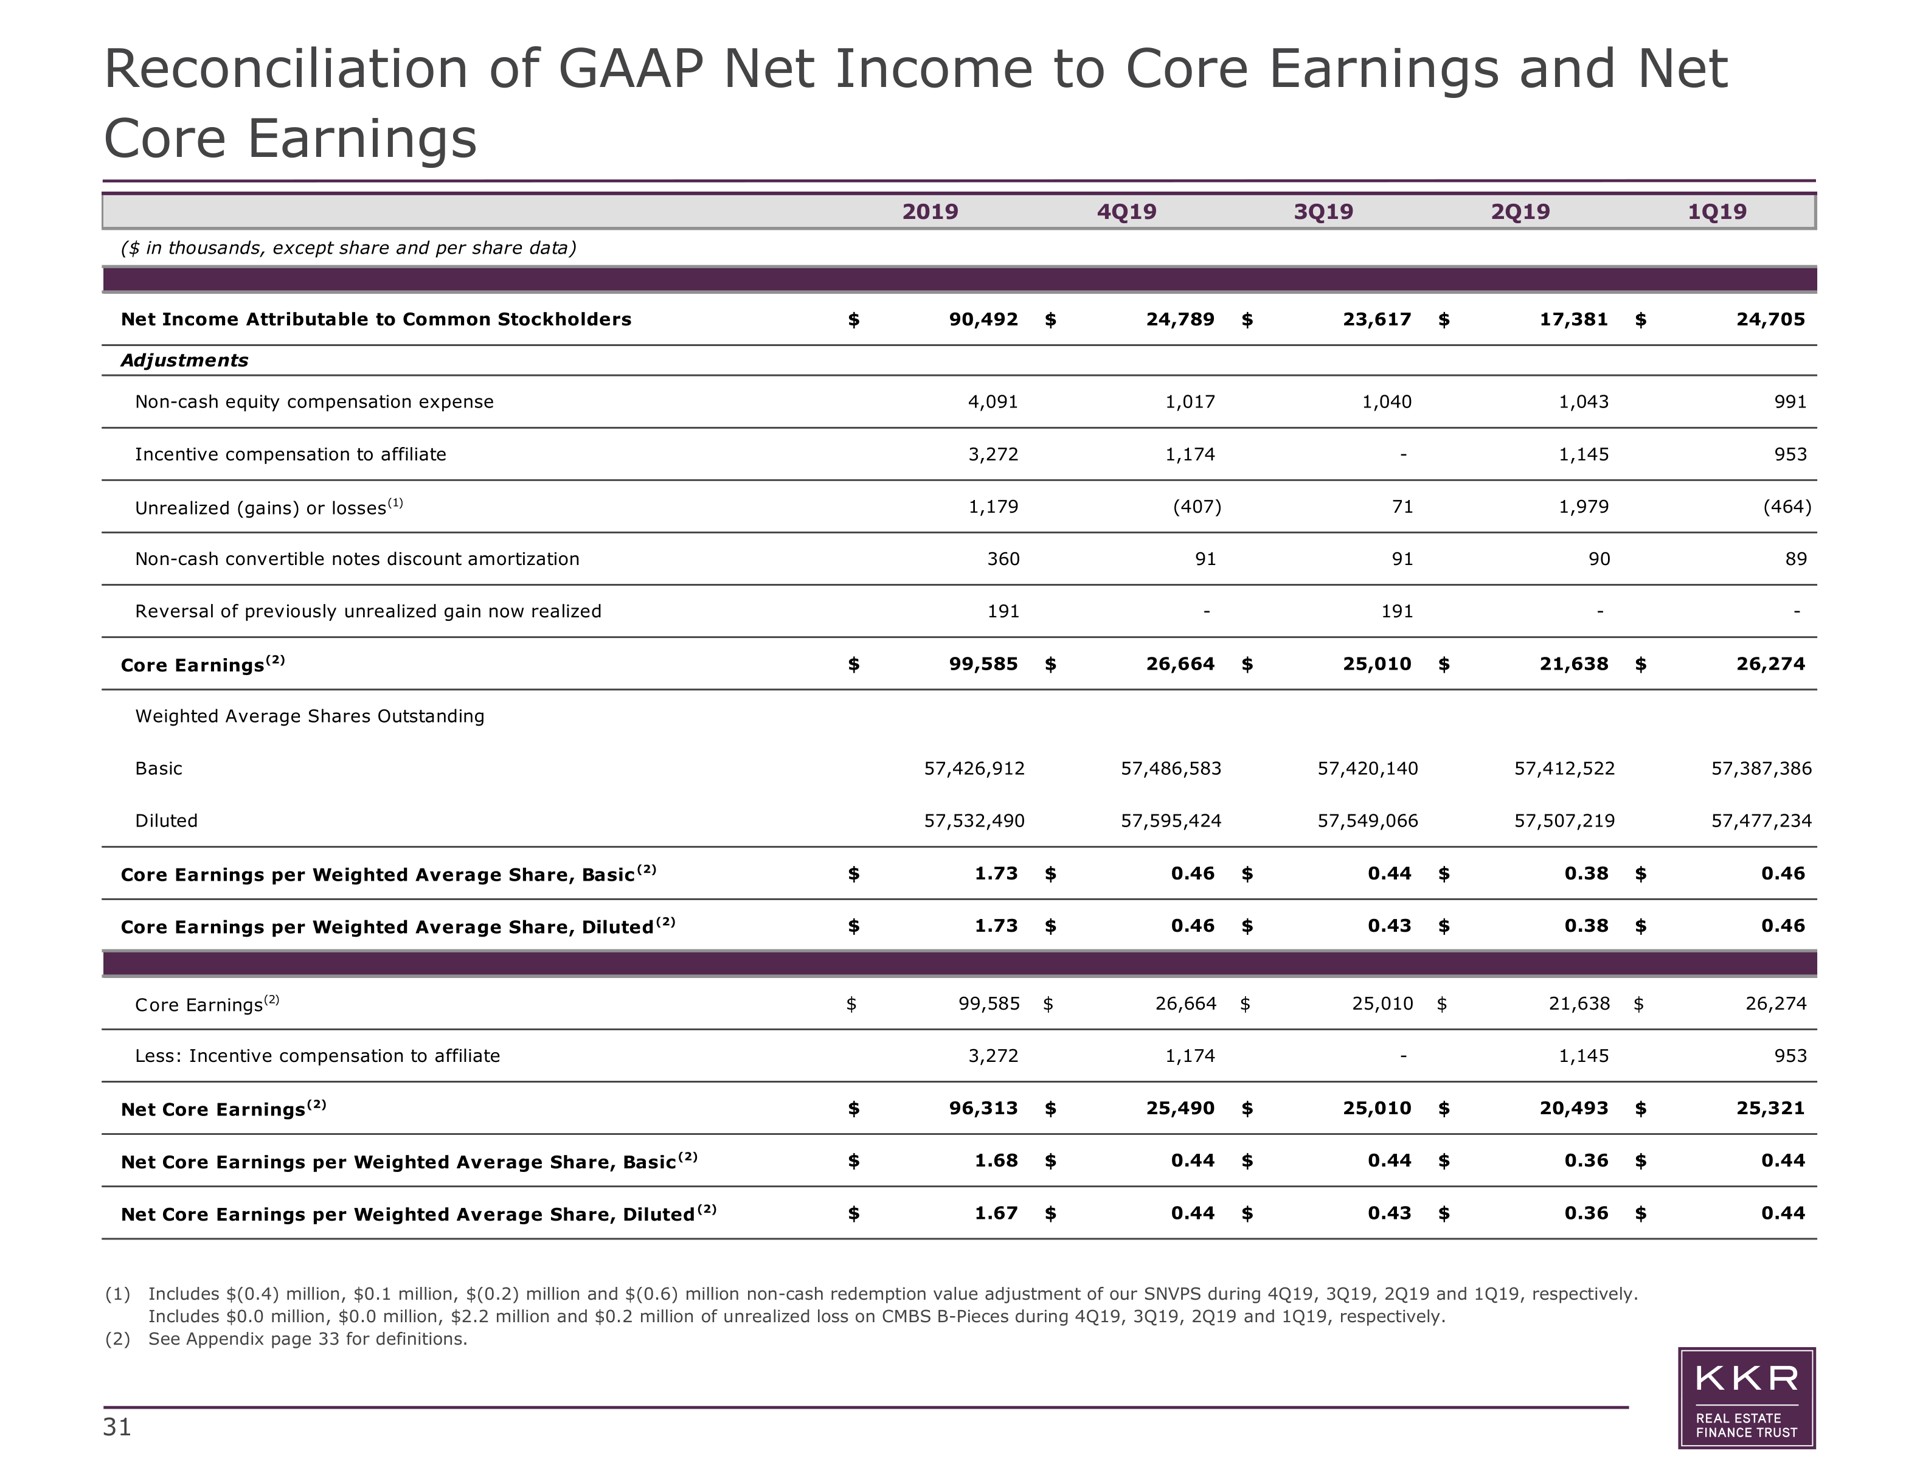 reconciliation of net income to core earnings and net core earnings | KKR Real Estate Finance Trust